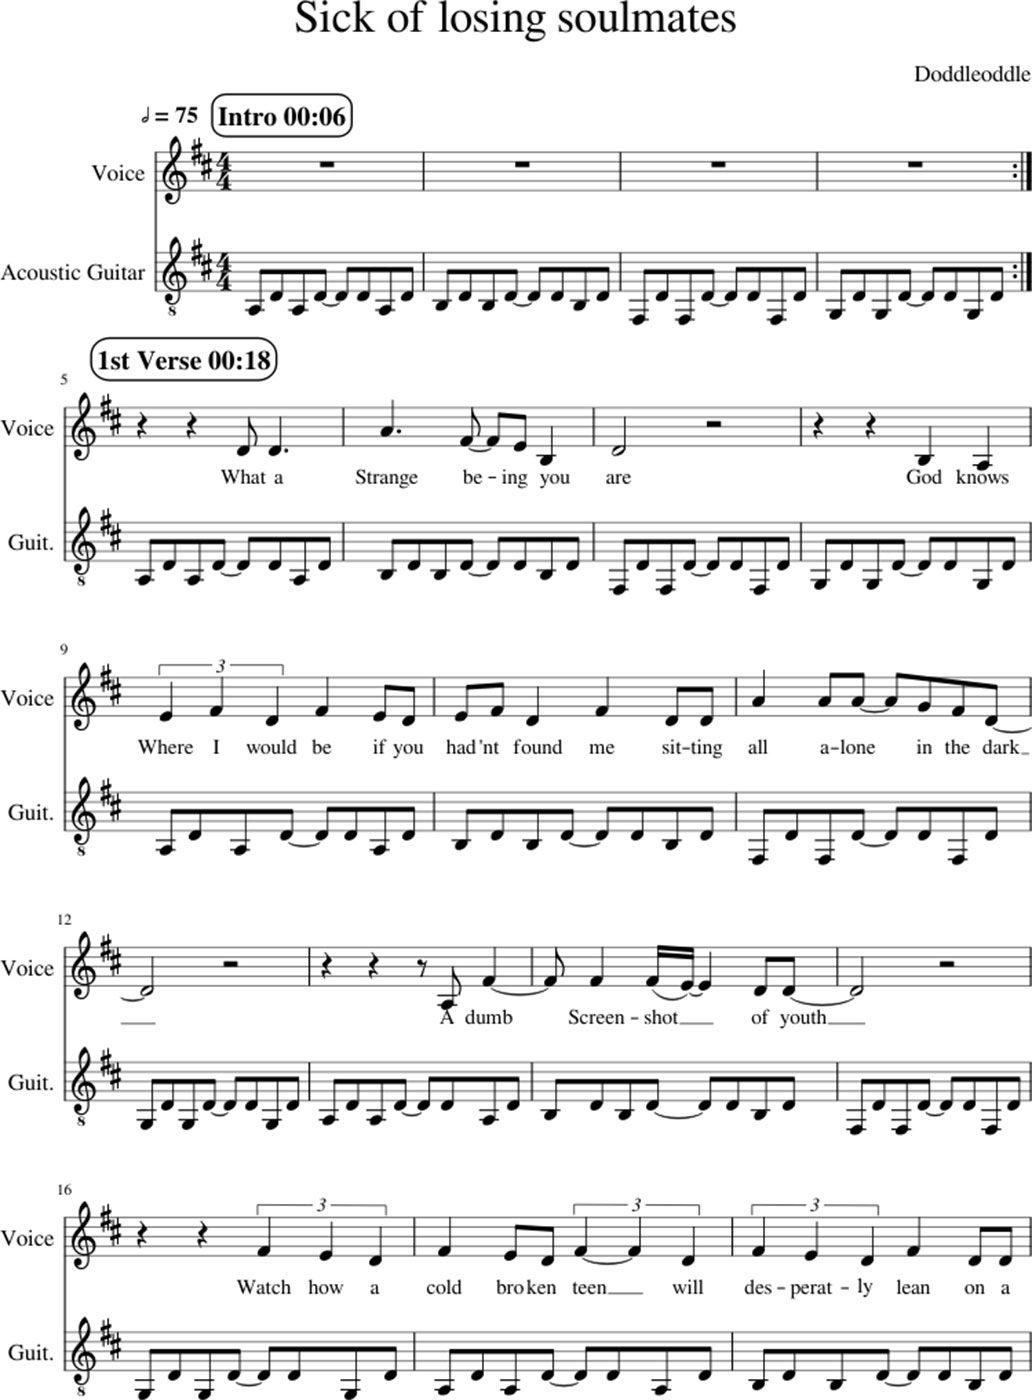 Sick of losing soulmate sheet music notes 1